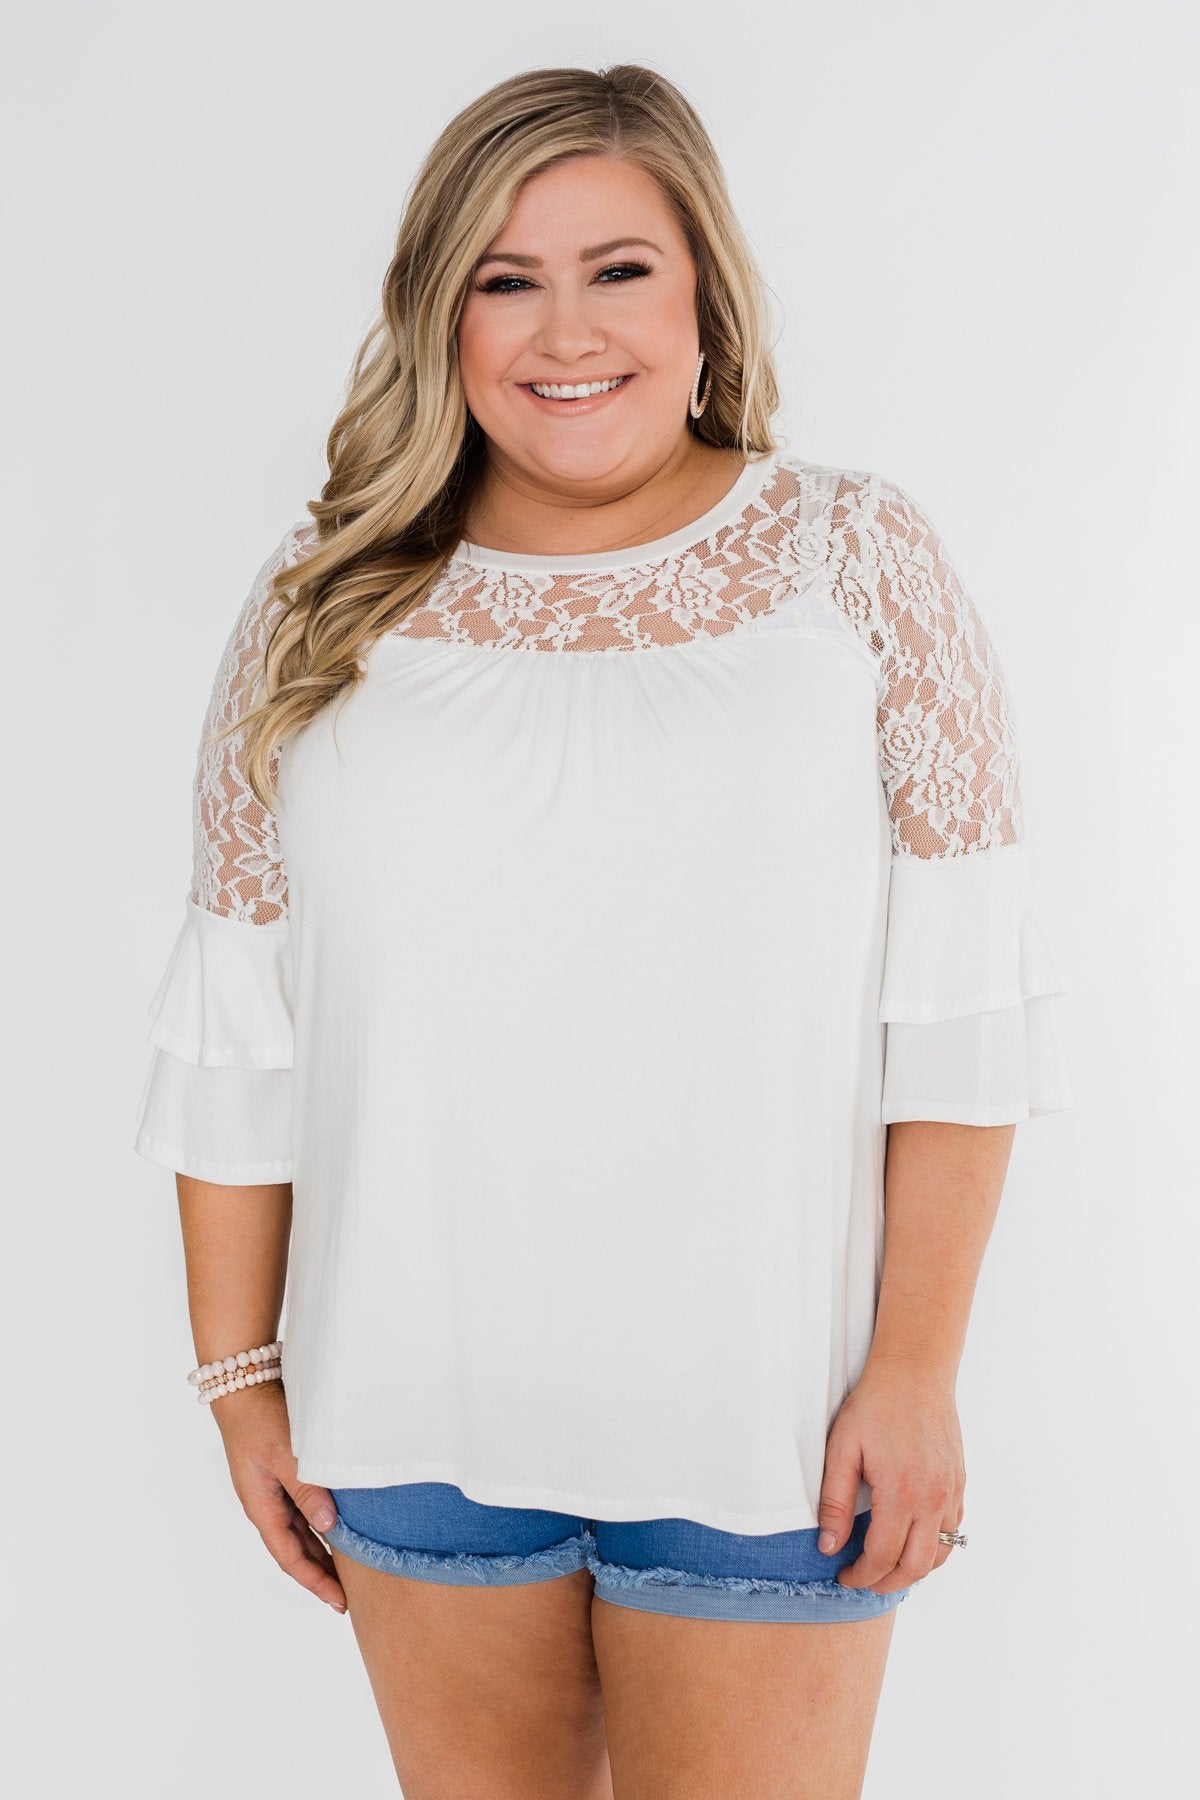 Right Beside Me Lace & Ruffles Top- Ivory